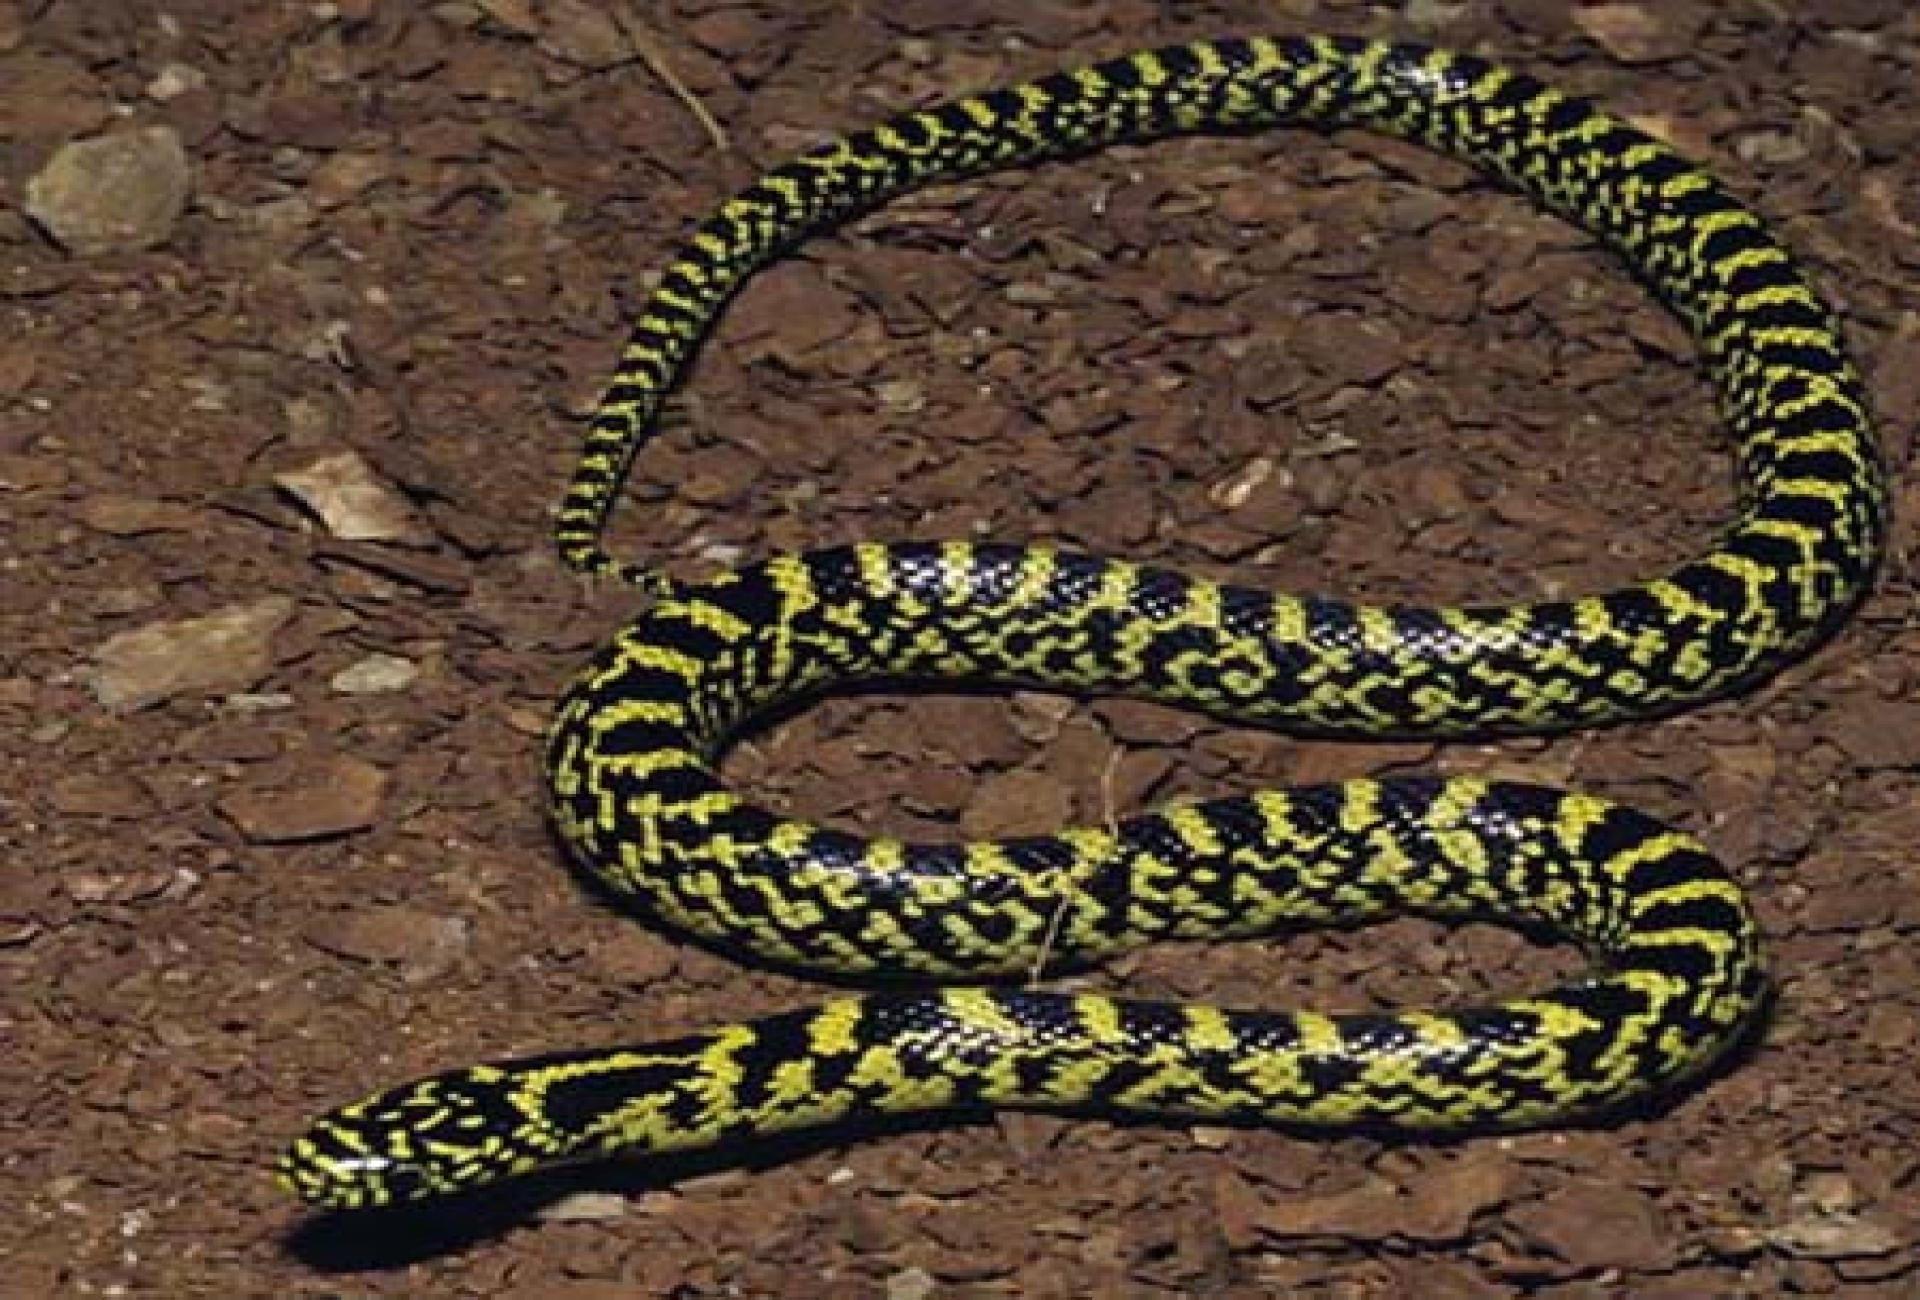 speckled king snake young